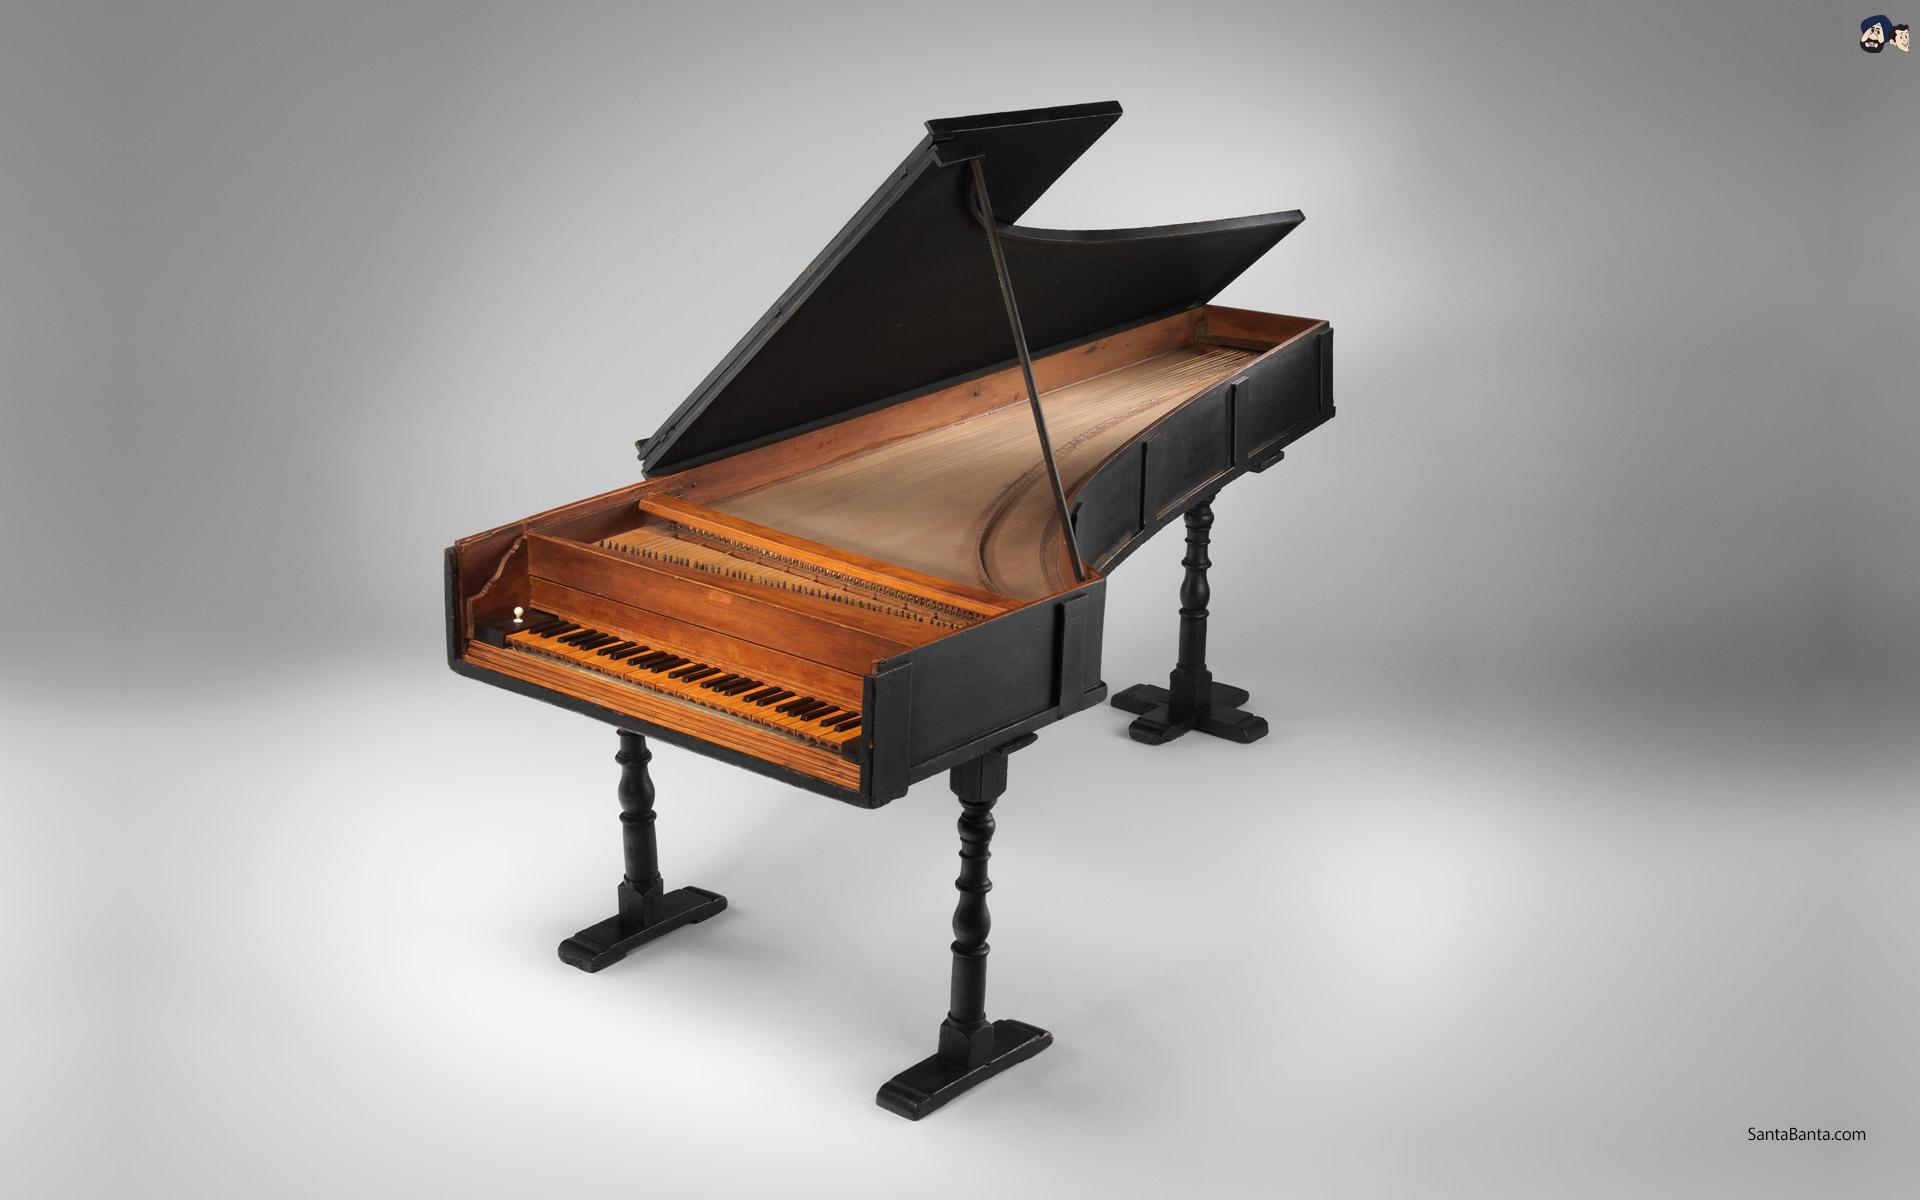 The first Piano invented by Italian harpsichord maker, Bartolomeo